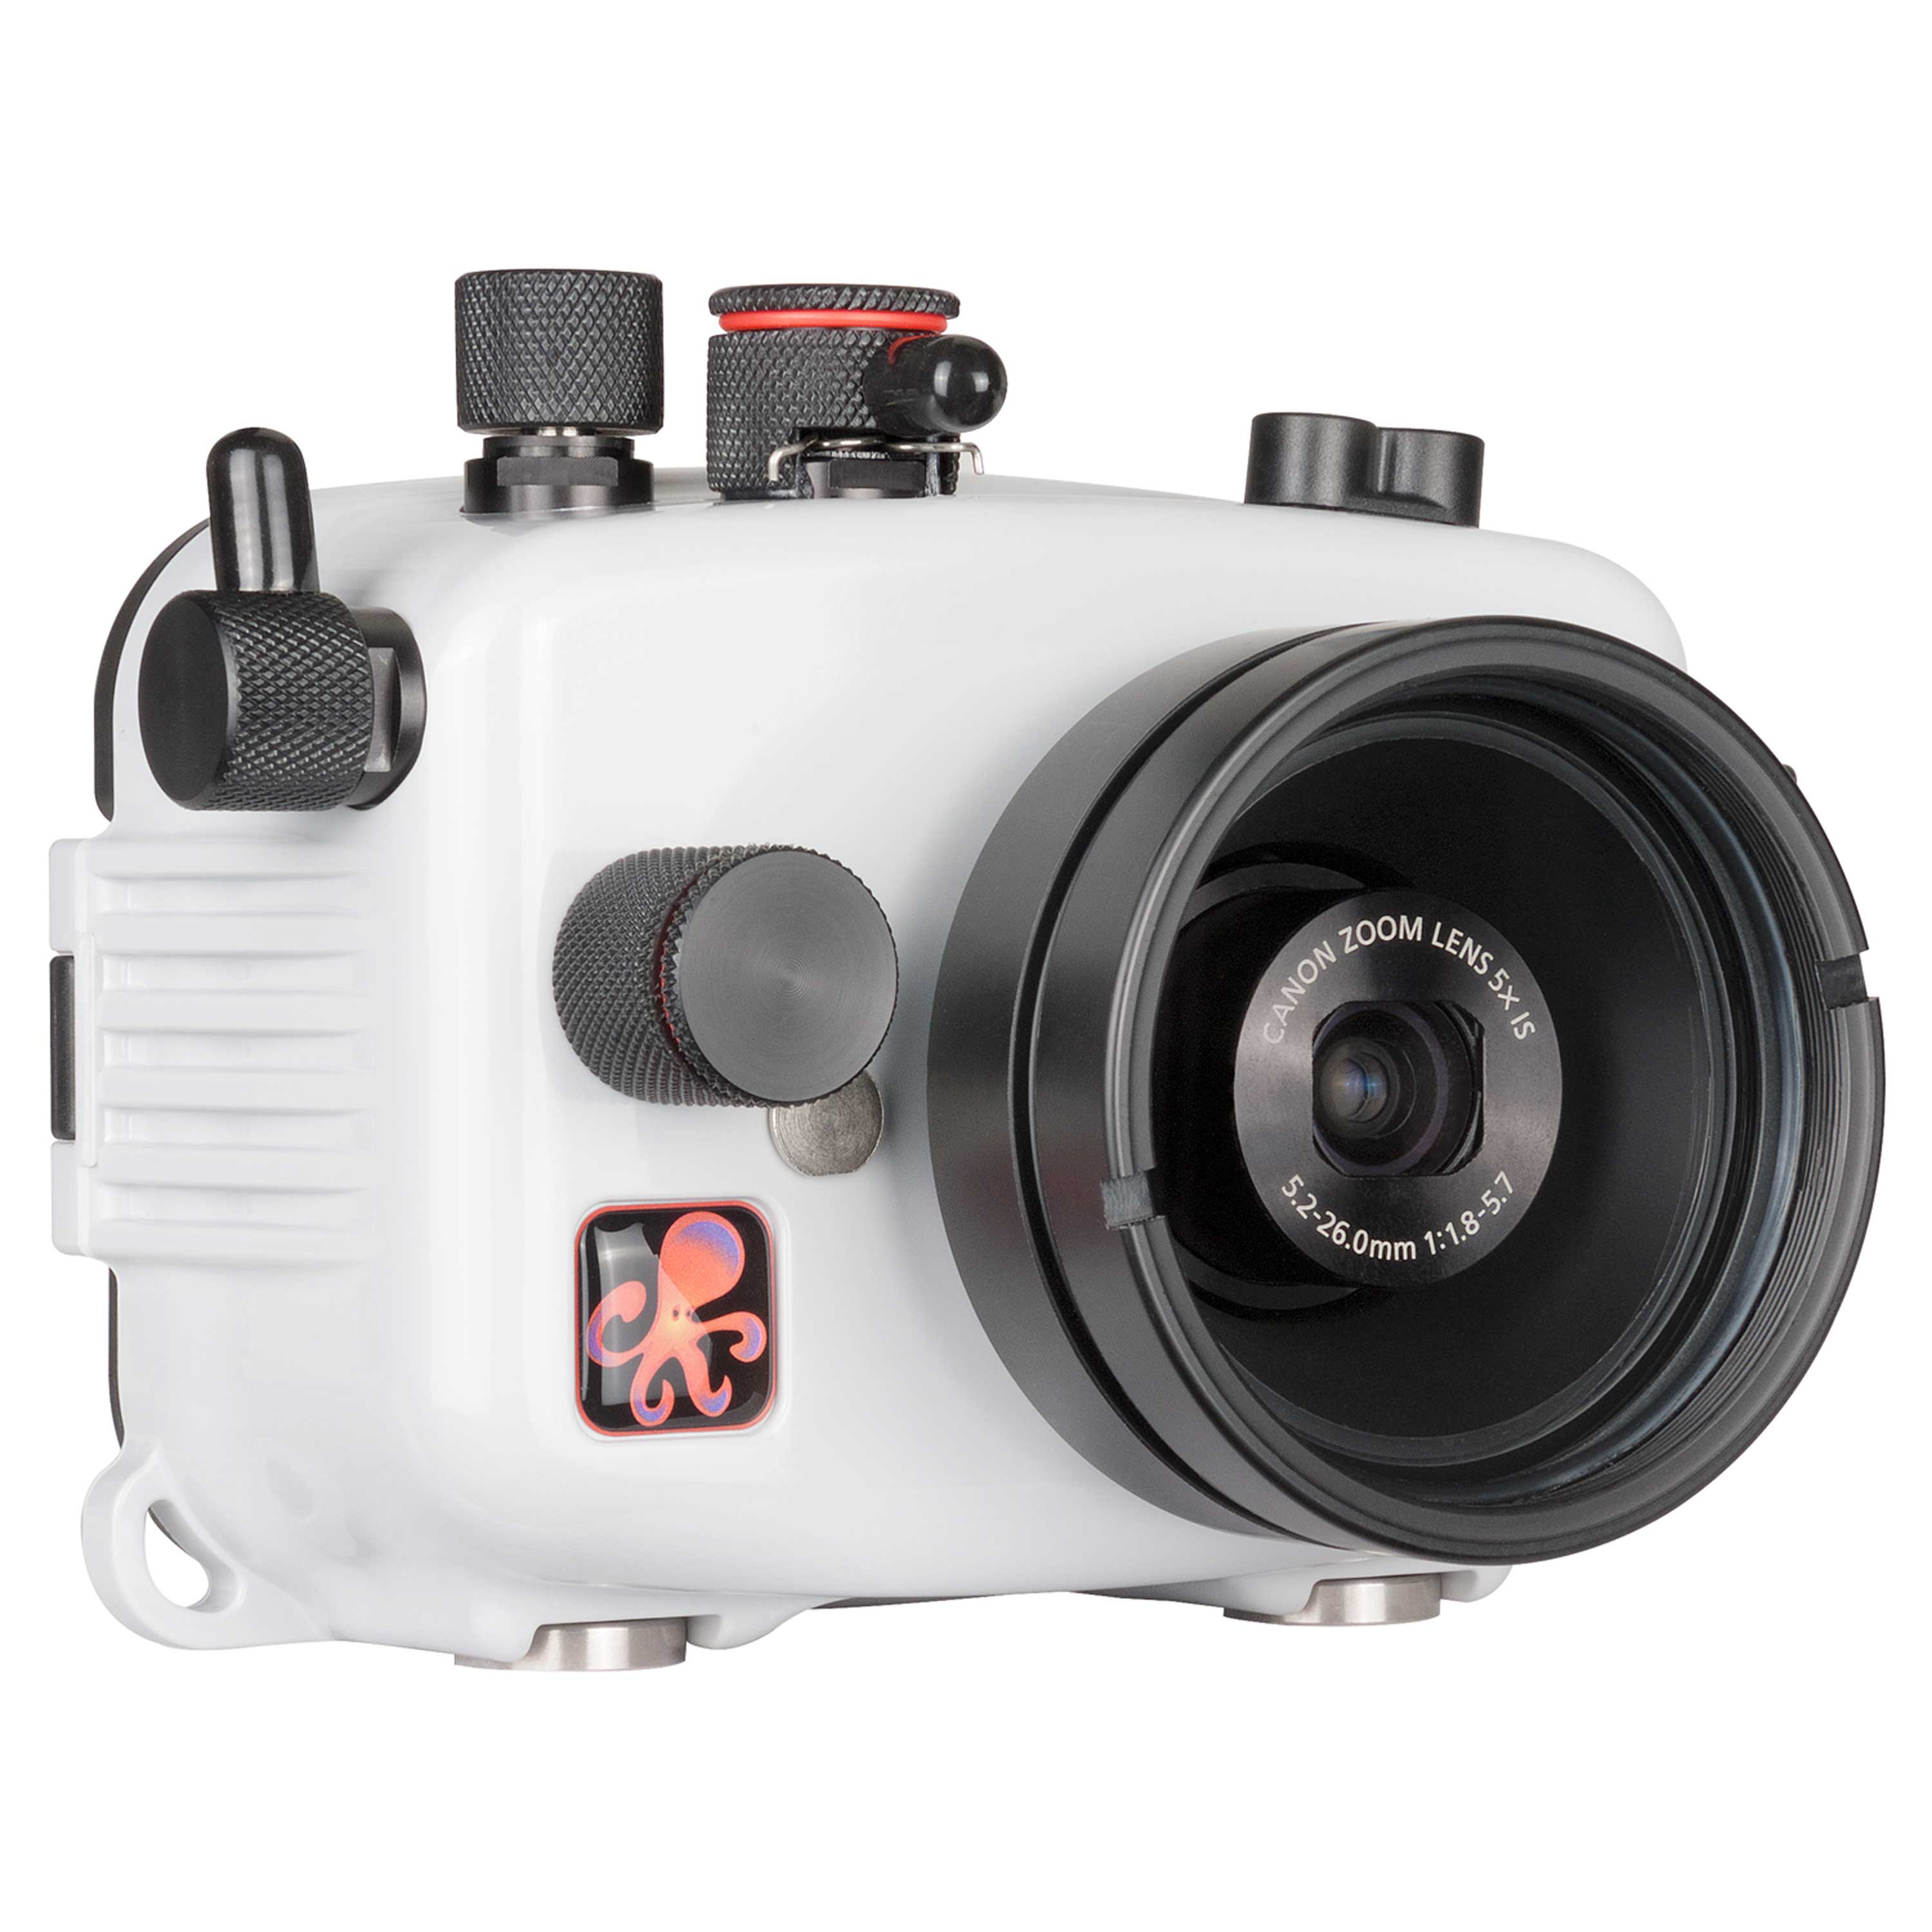 Underwater Housing for Canon PowerShot S120 IS (Updated)